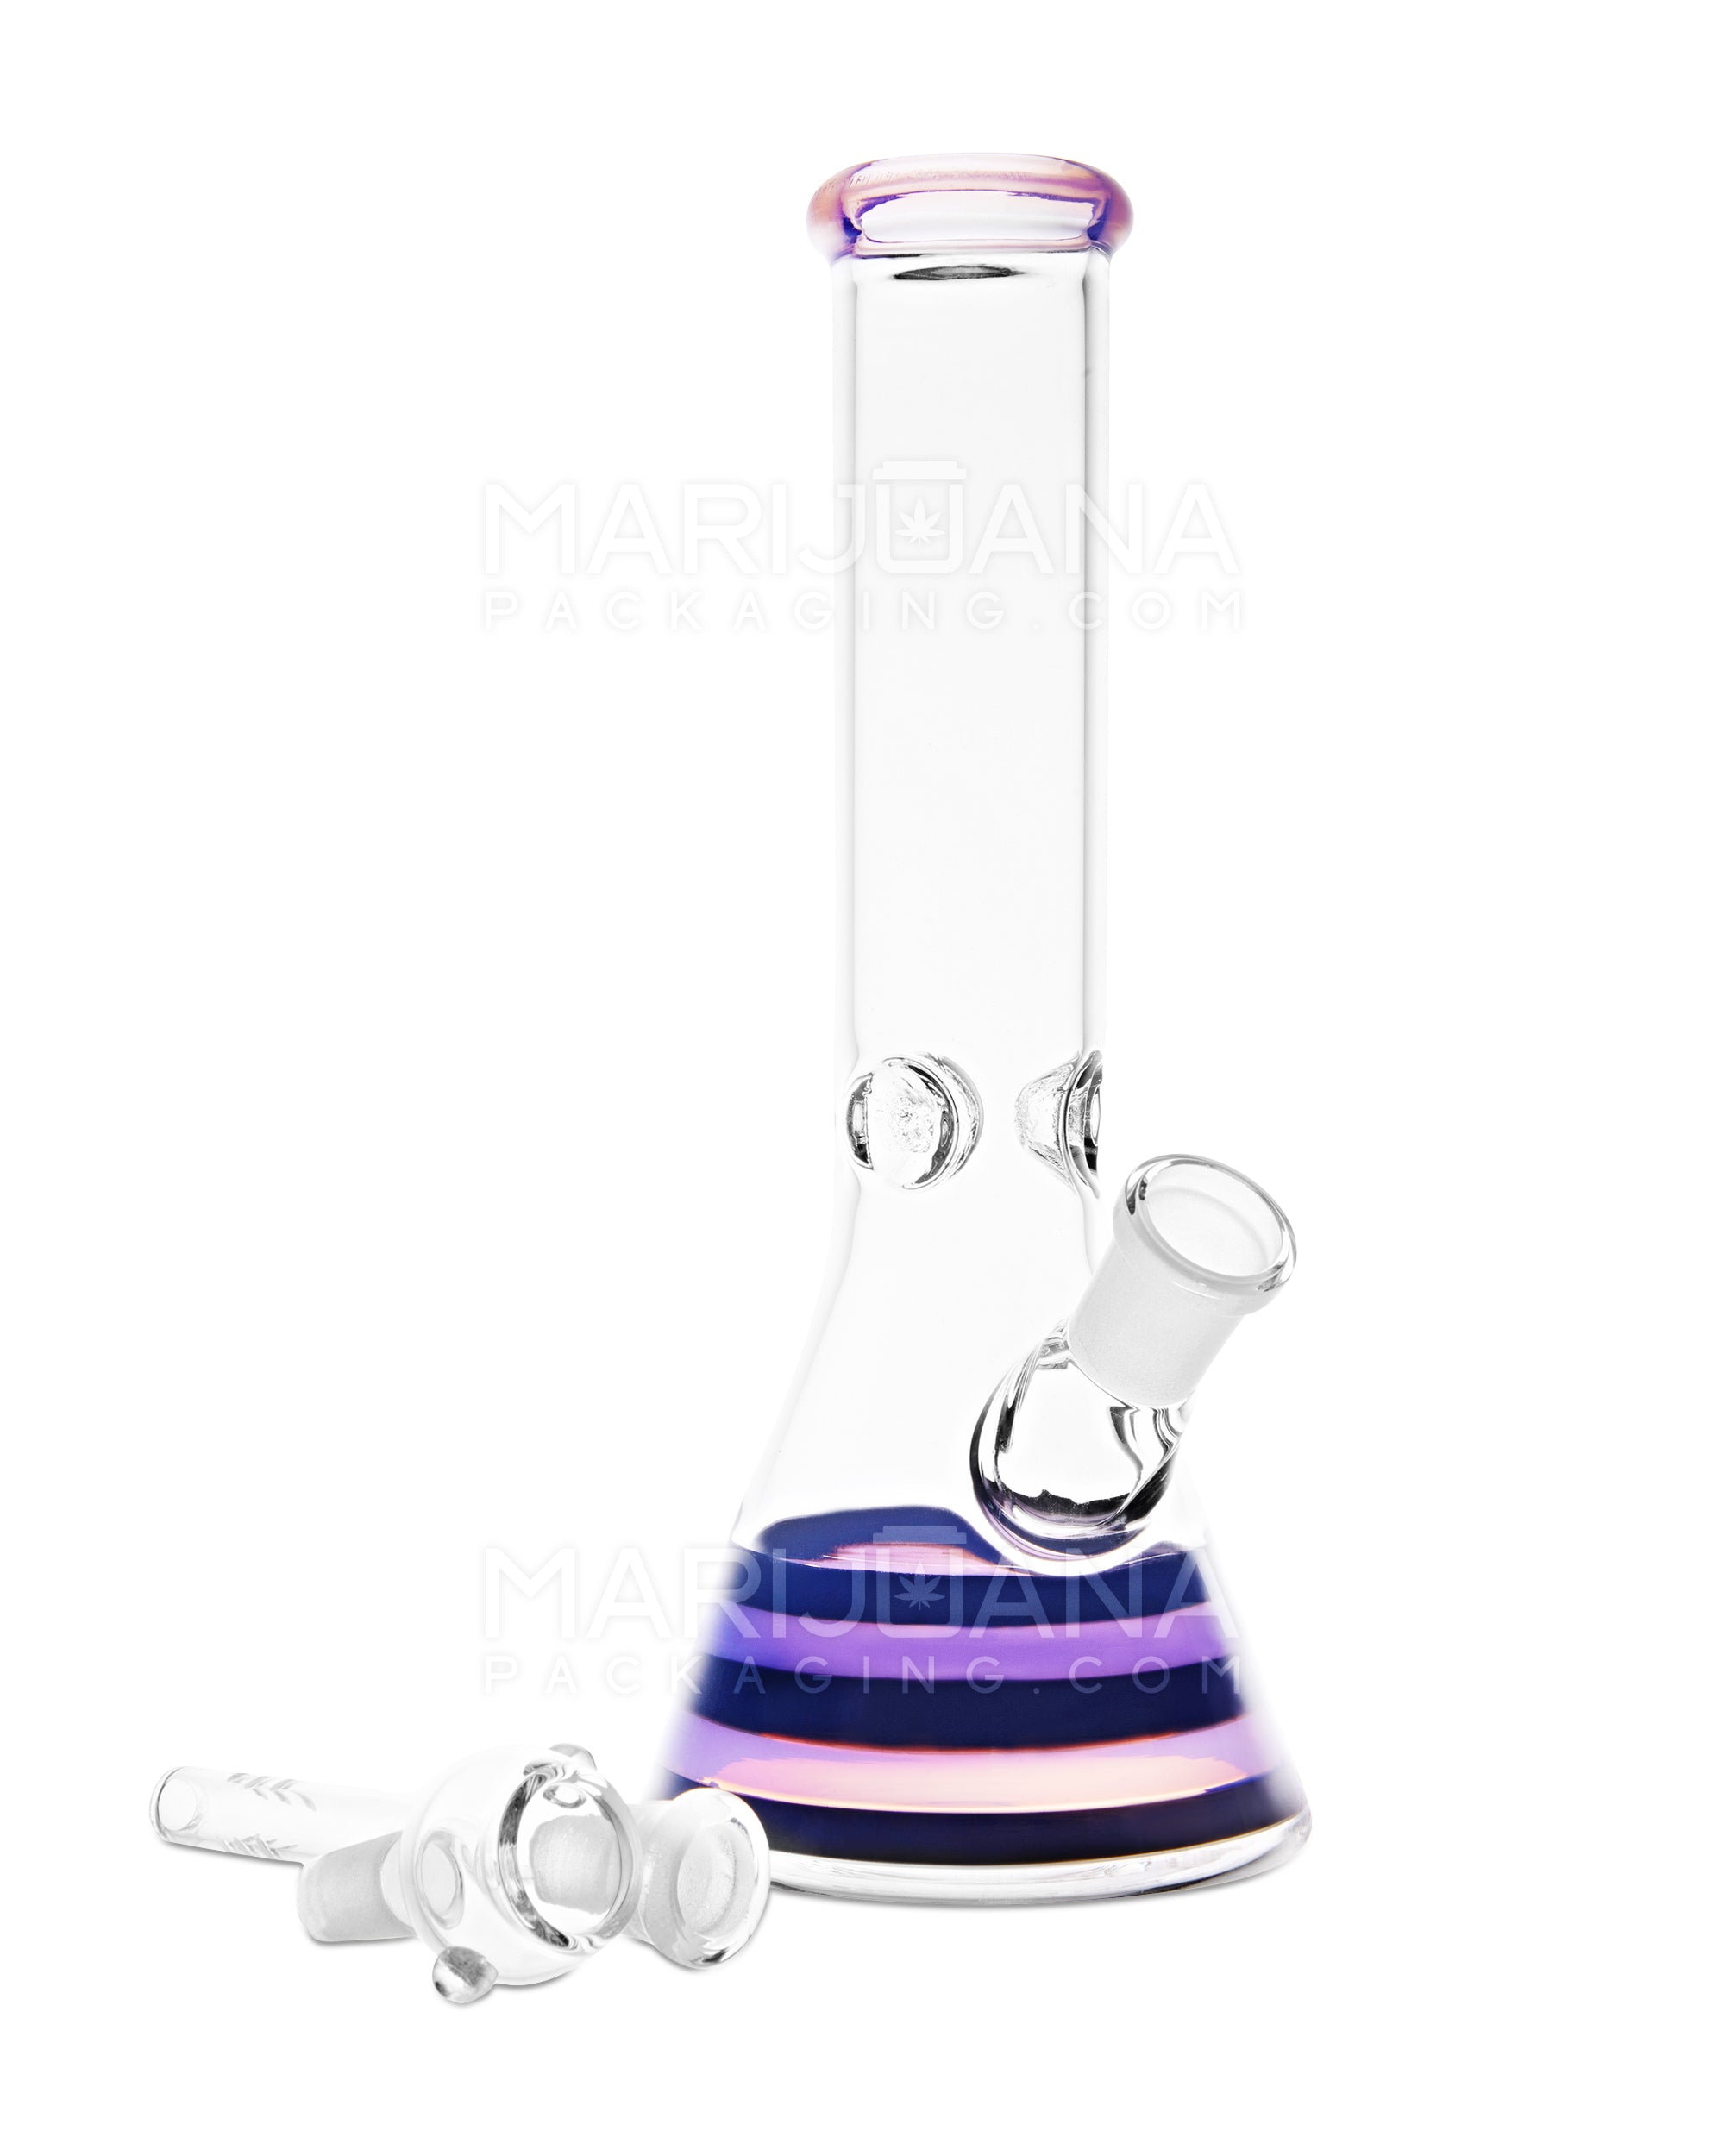 Straight Neck Thick Stripes Glass Beaker Water Pipe w/ Ice Catcher | 10in Tall - 14mm Bowl - Purple